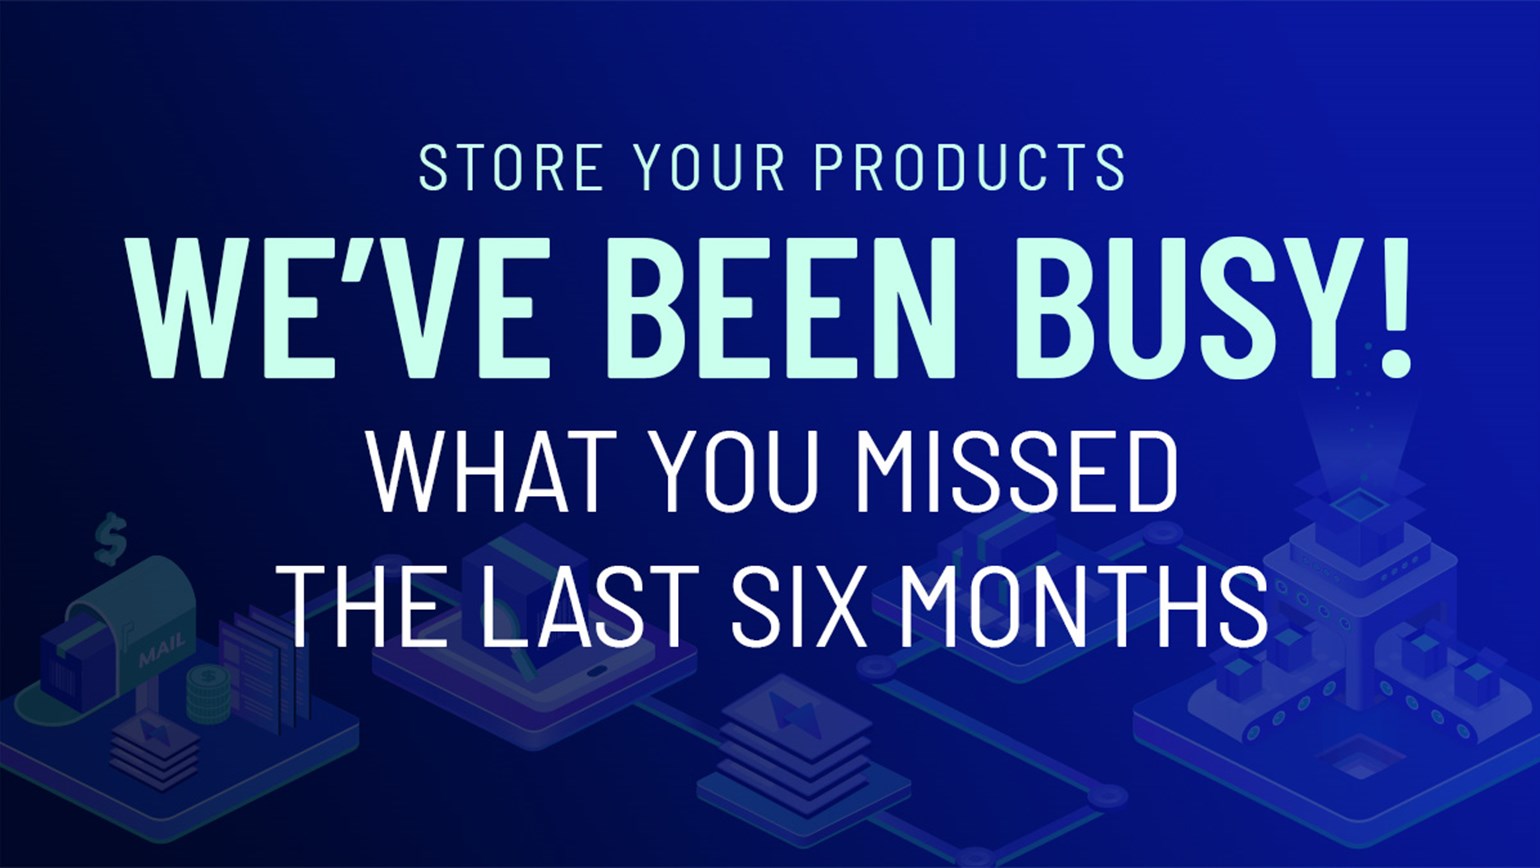 Store Your Products: We’ve Been Busy! Here’s a 6 Month Recap